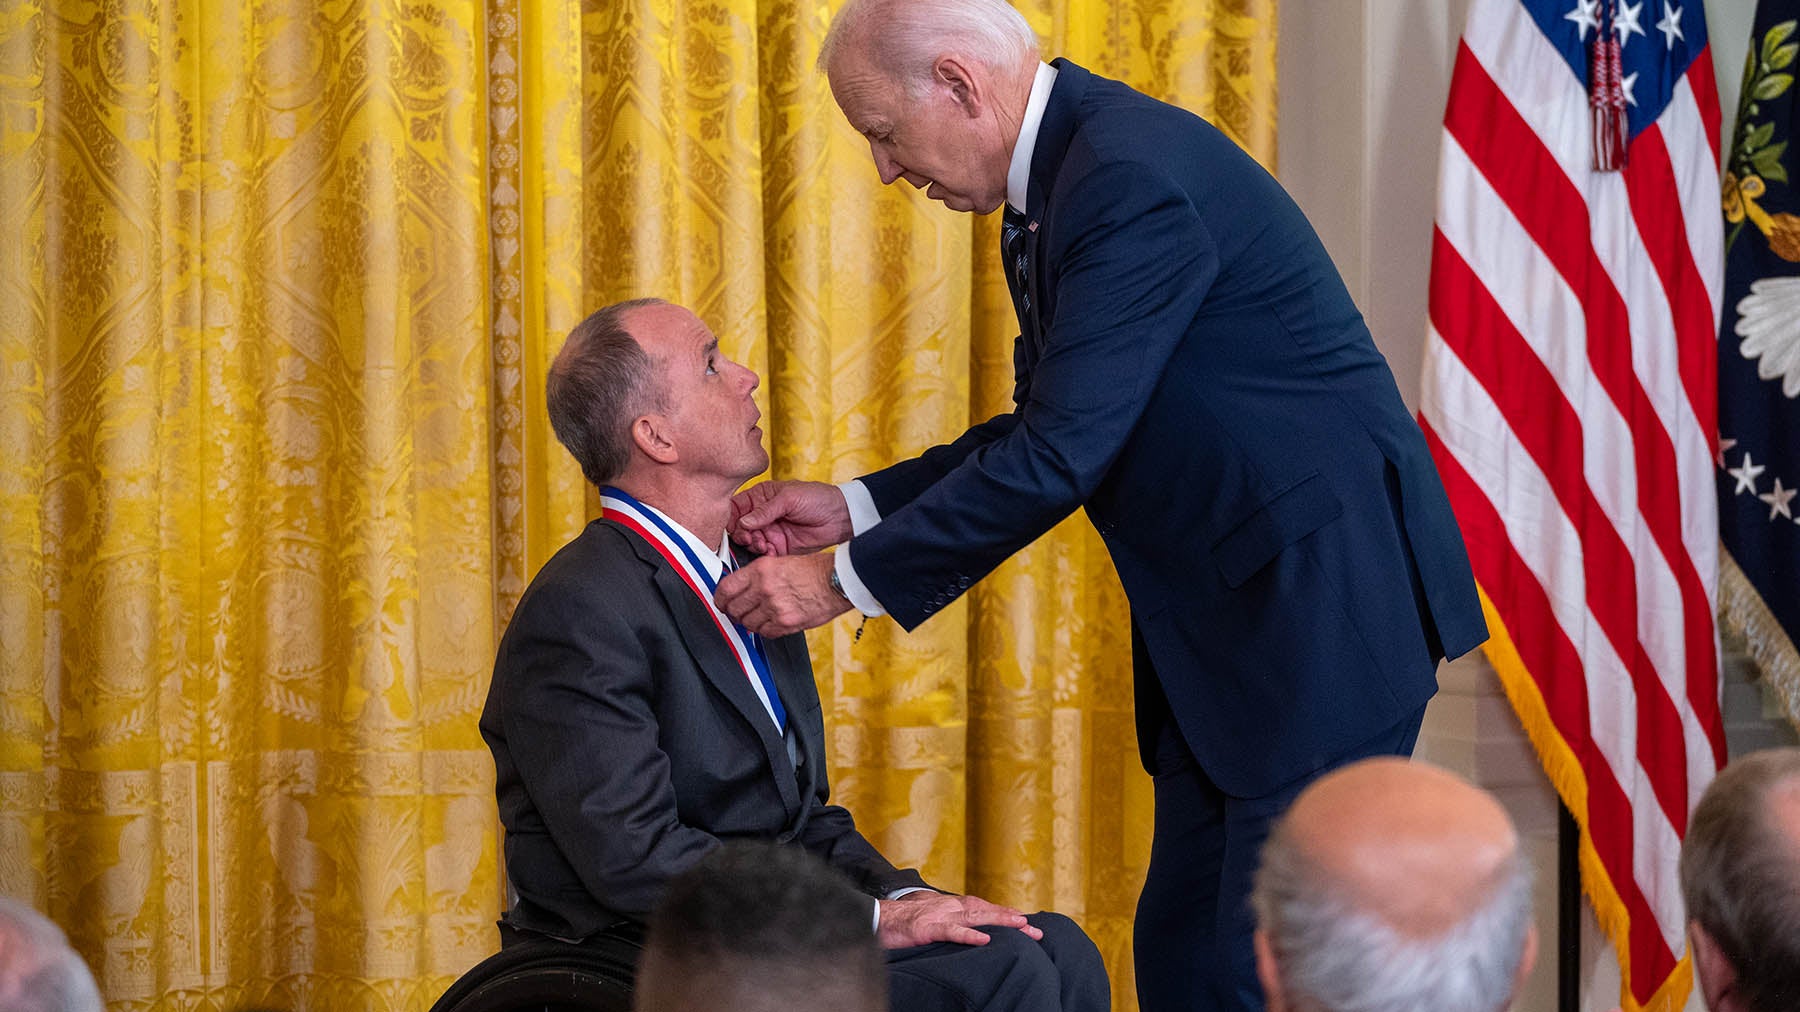 President Joseph R. Biden Jr. awards the National Medal of Technology and Innovation to Dr. Rory Cooper at the White House in Washington, D.C., Oct. 24, 2023.